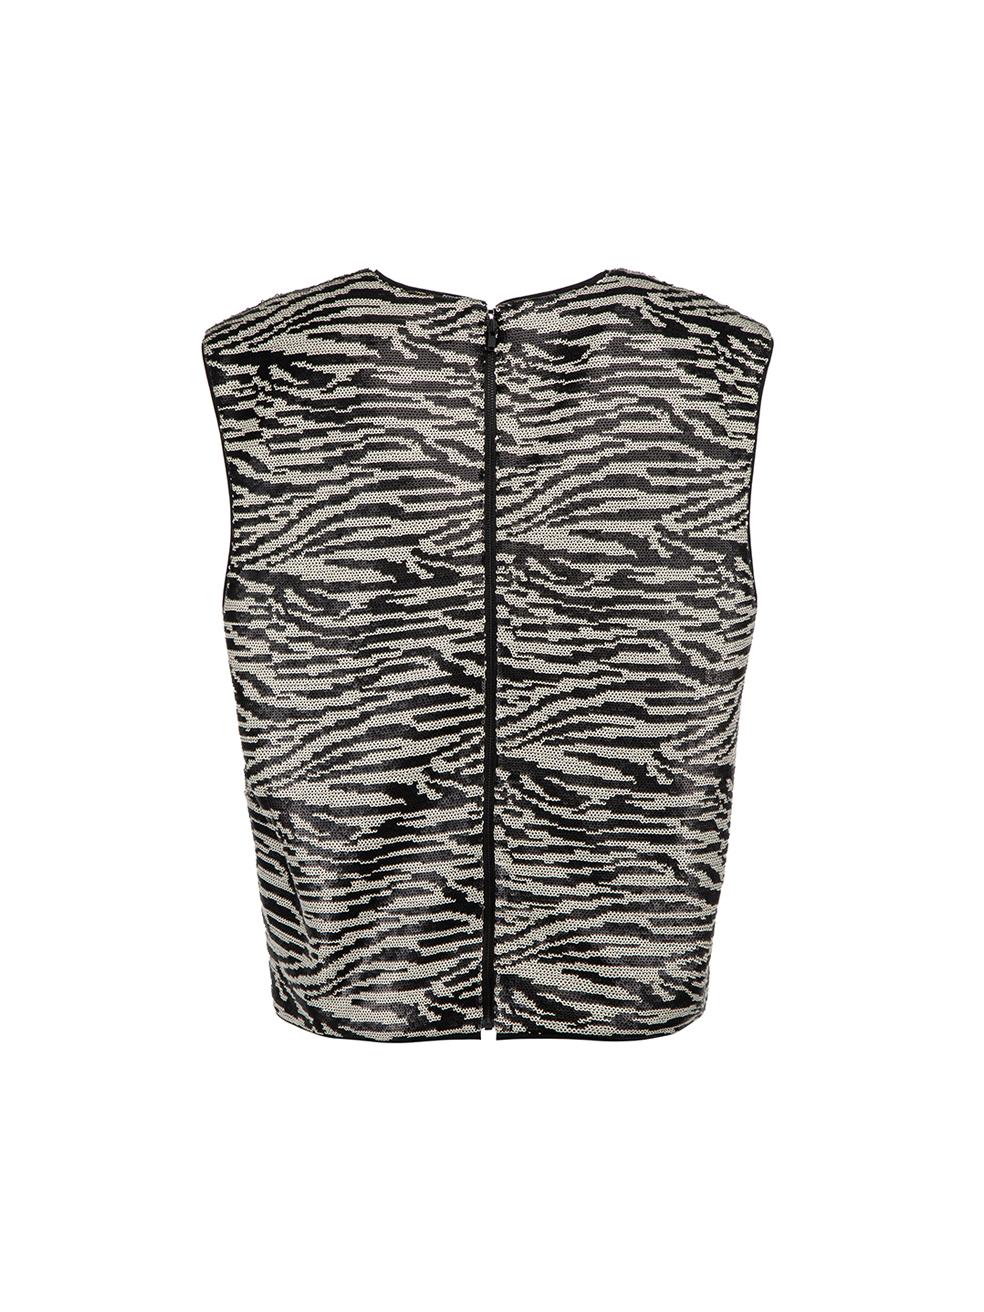 Black & White Sequin Zebra Pattern Sleeveless Top Size XL In Good Condition For Sale In London, GB